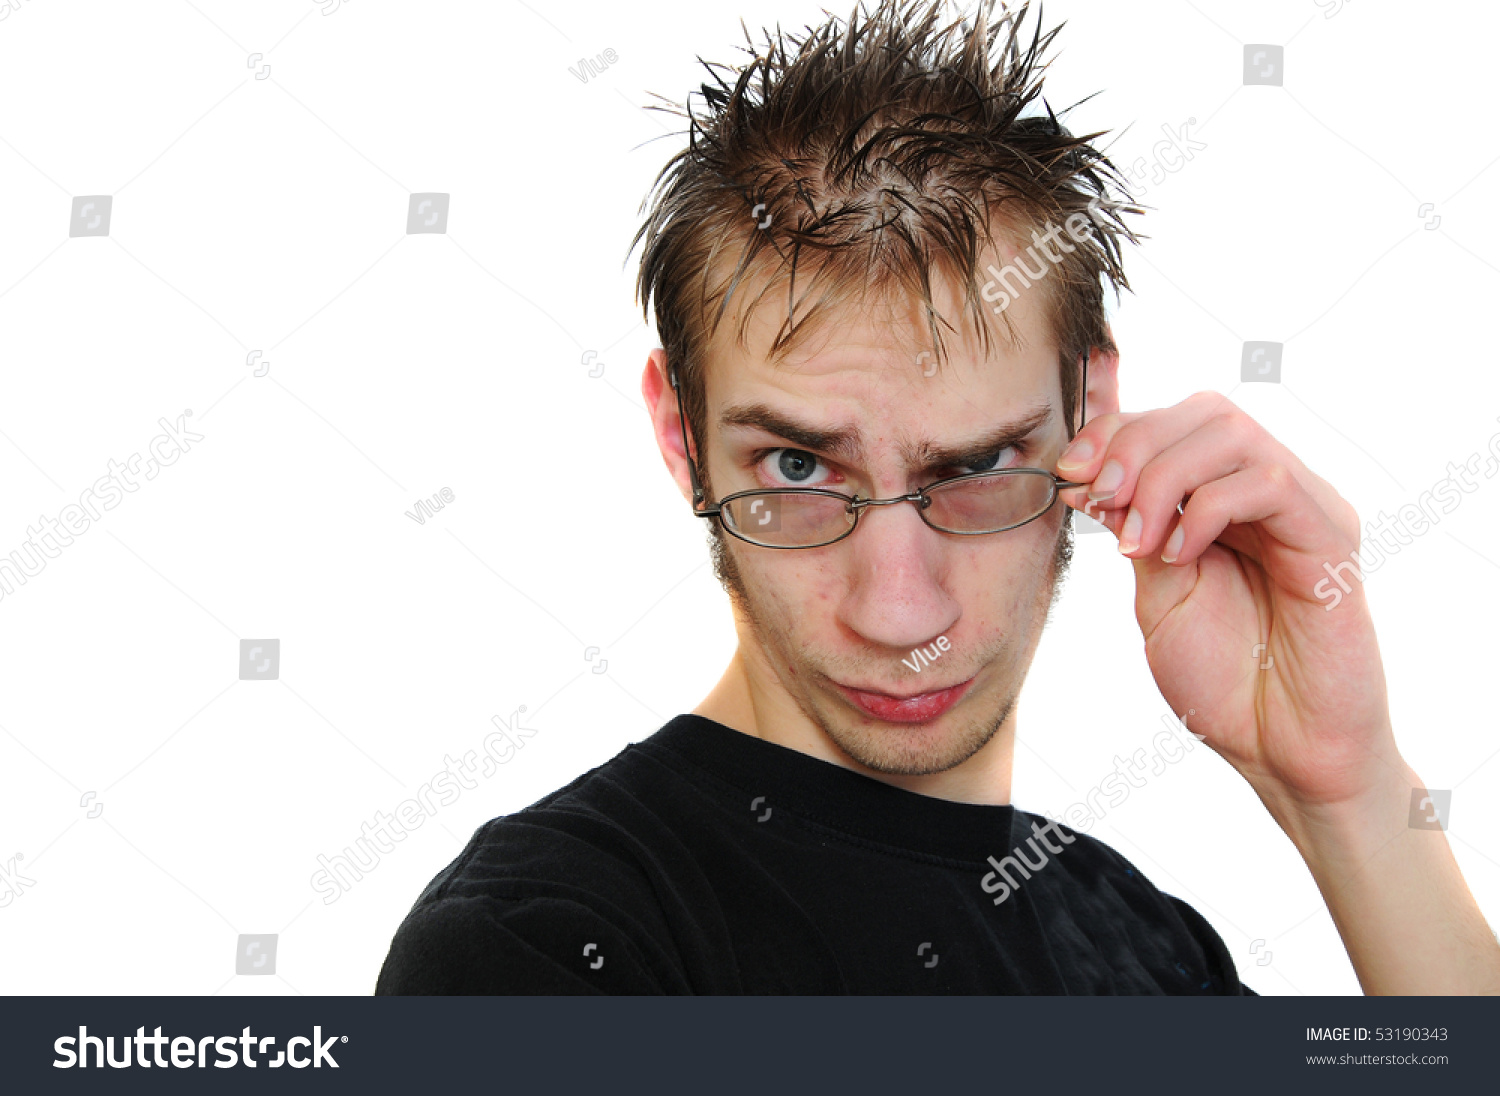 [Bild: stock-photo-portrait-of-a-young-adult-wi...190343.jpg]